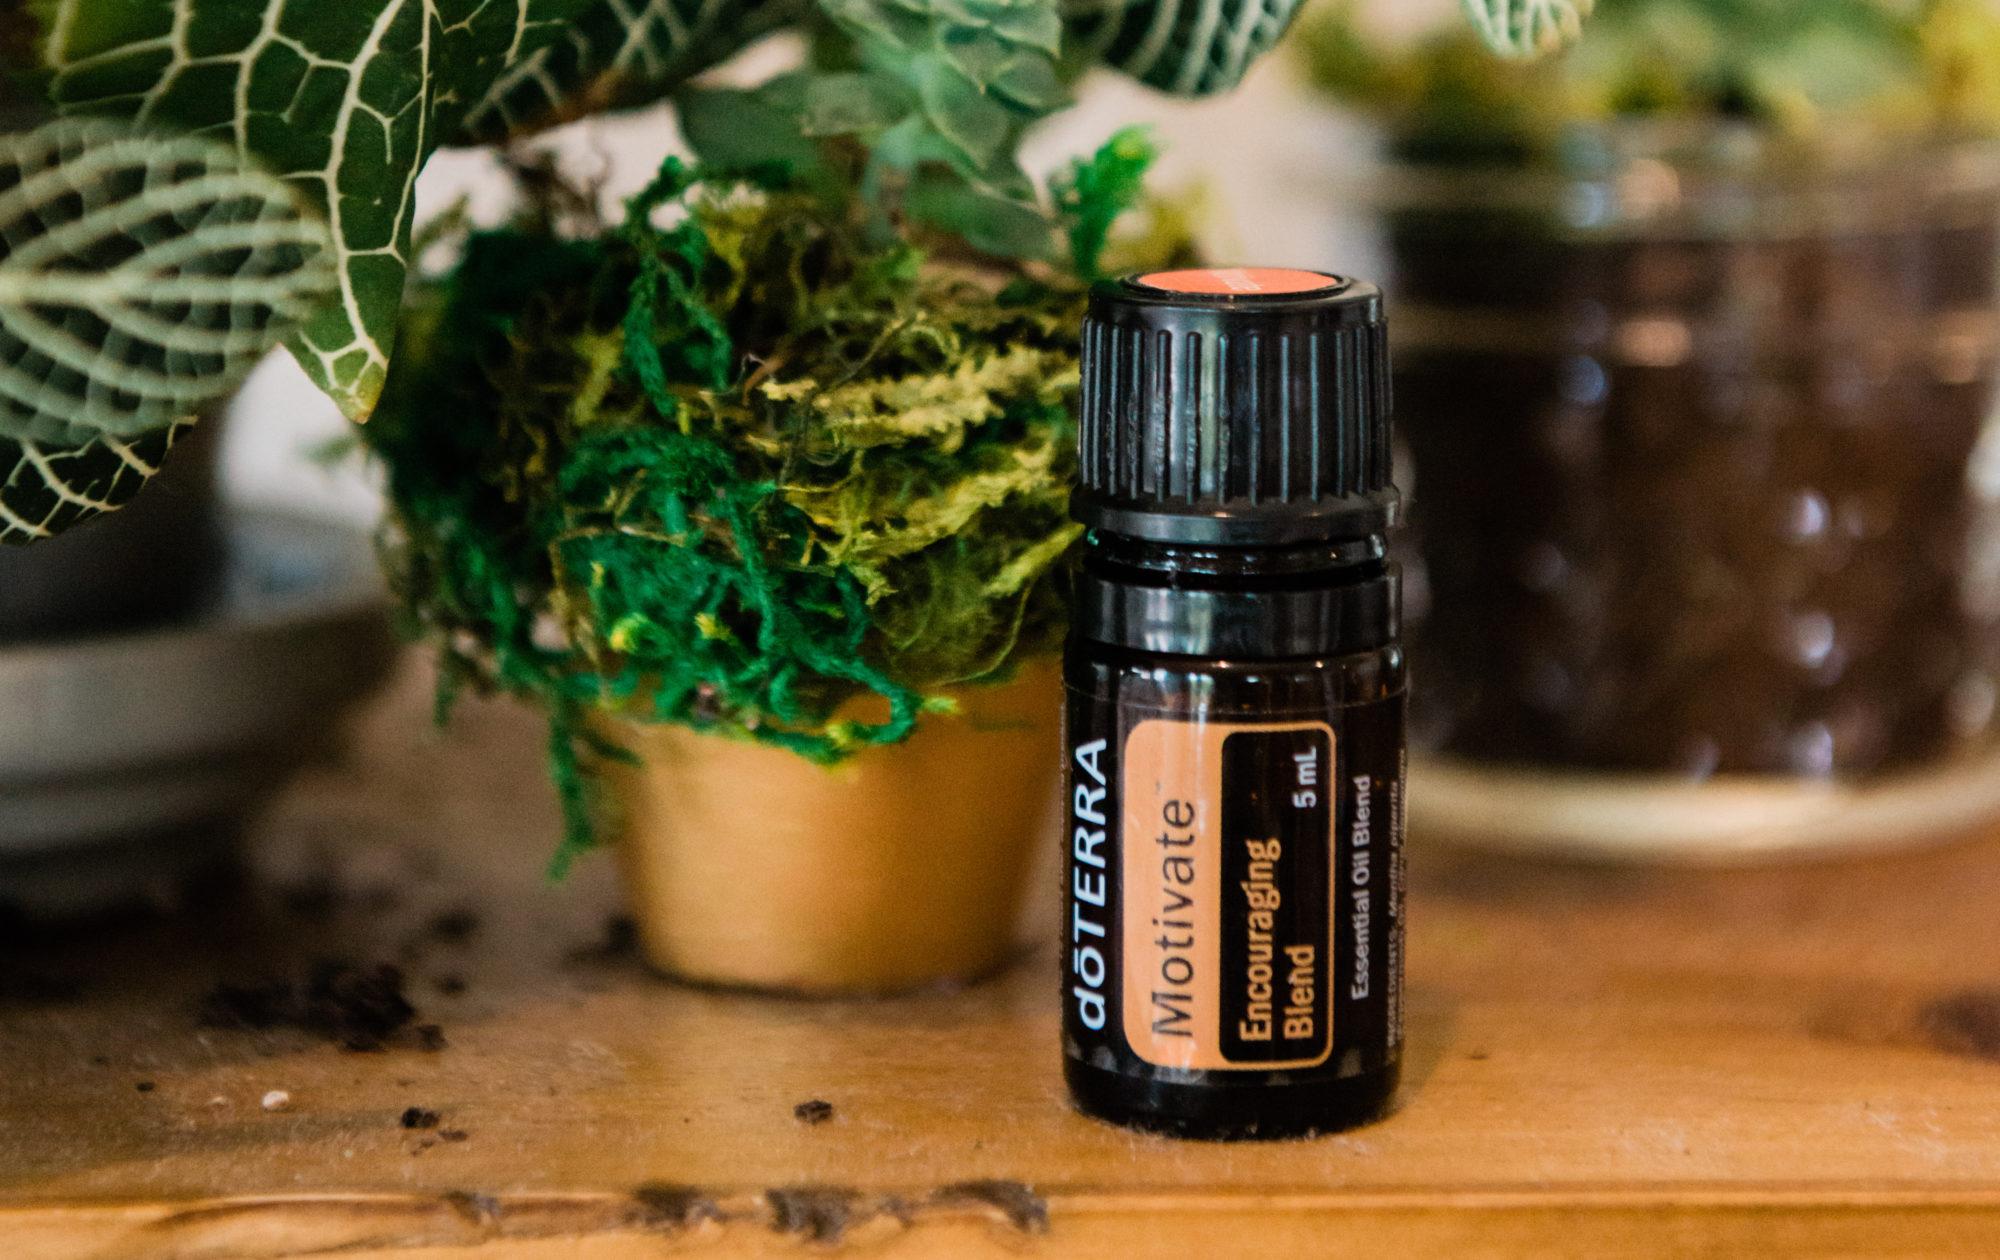 Motivate Essential oil on wood table with green plants in the background